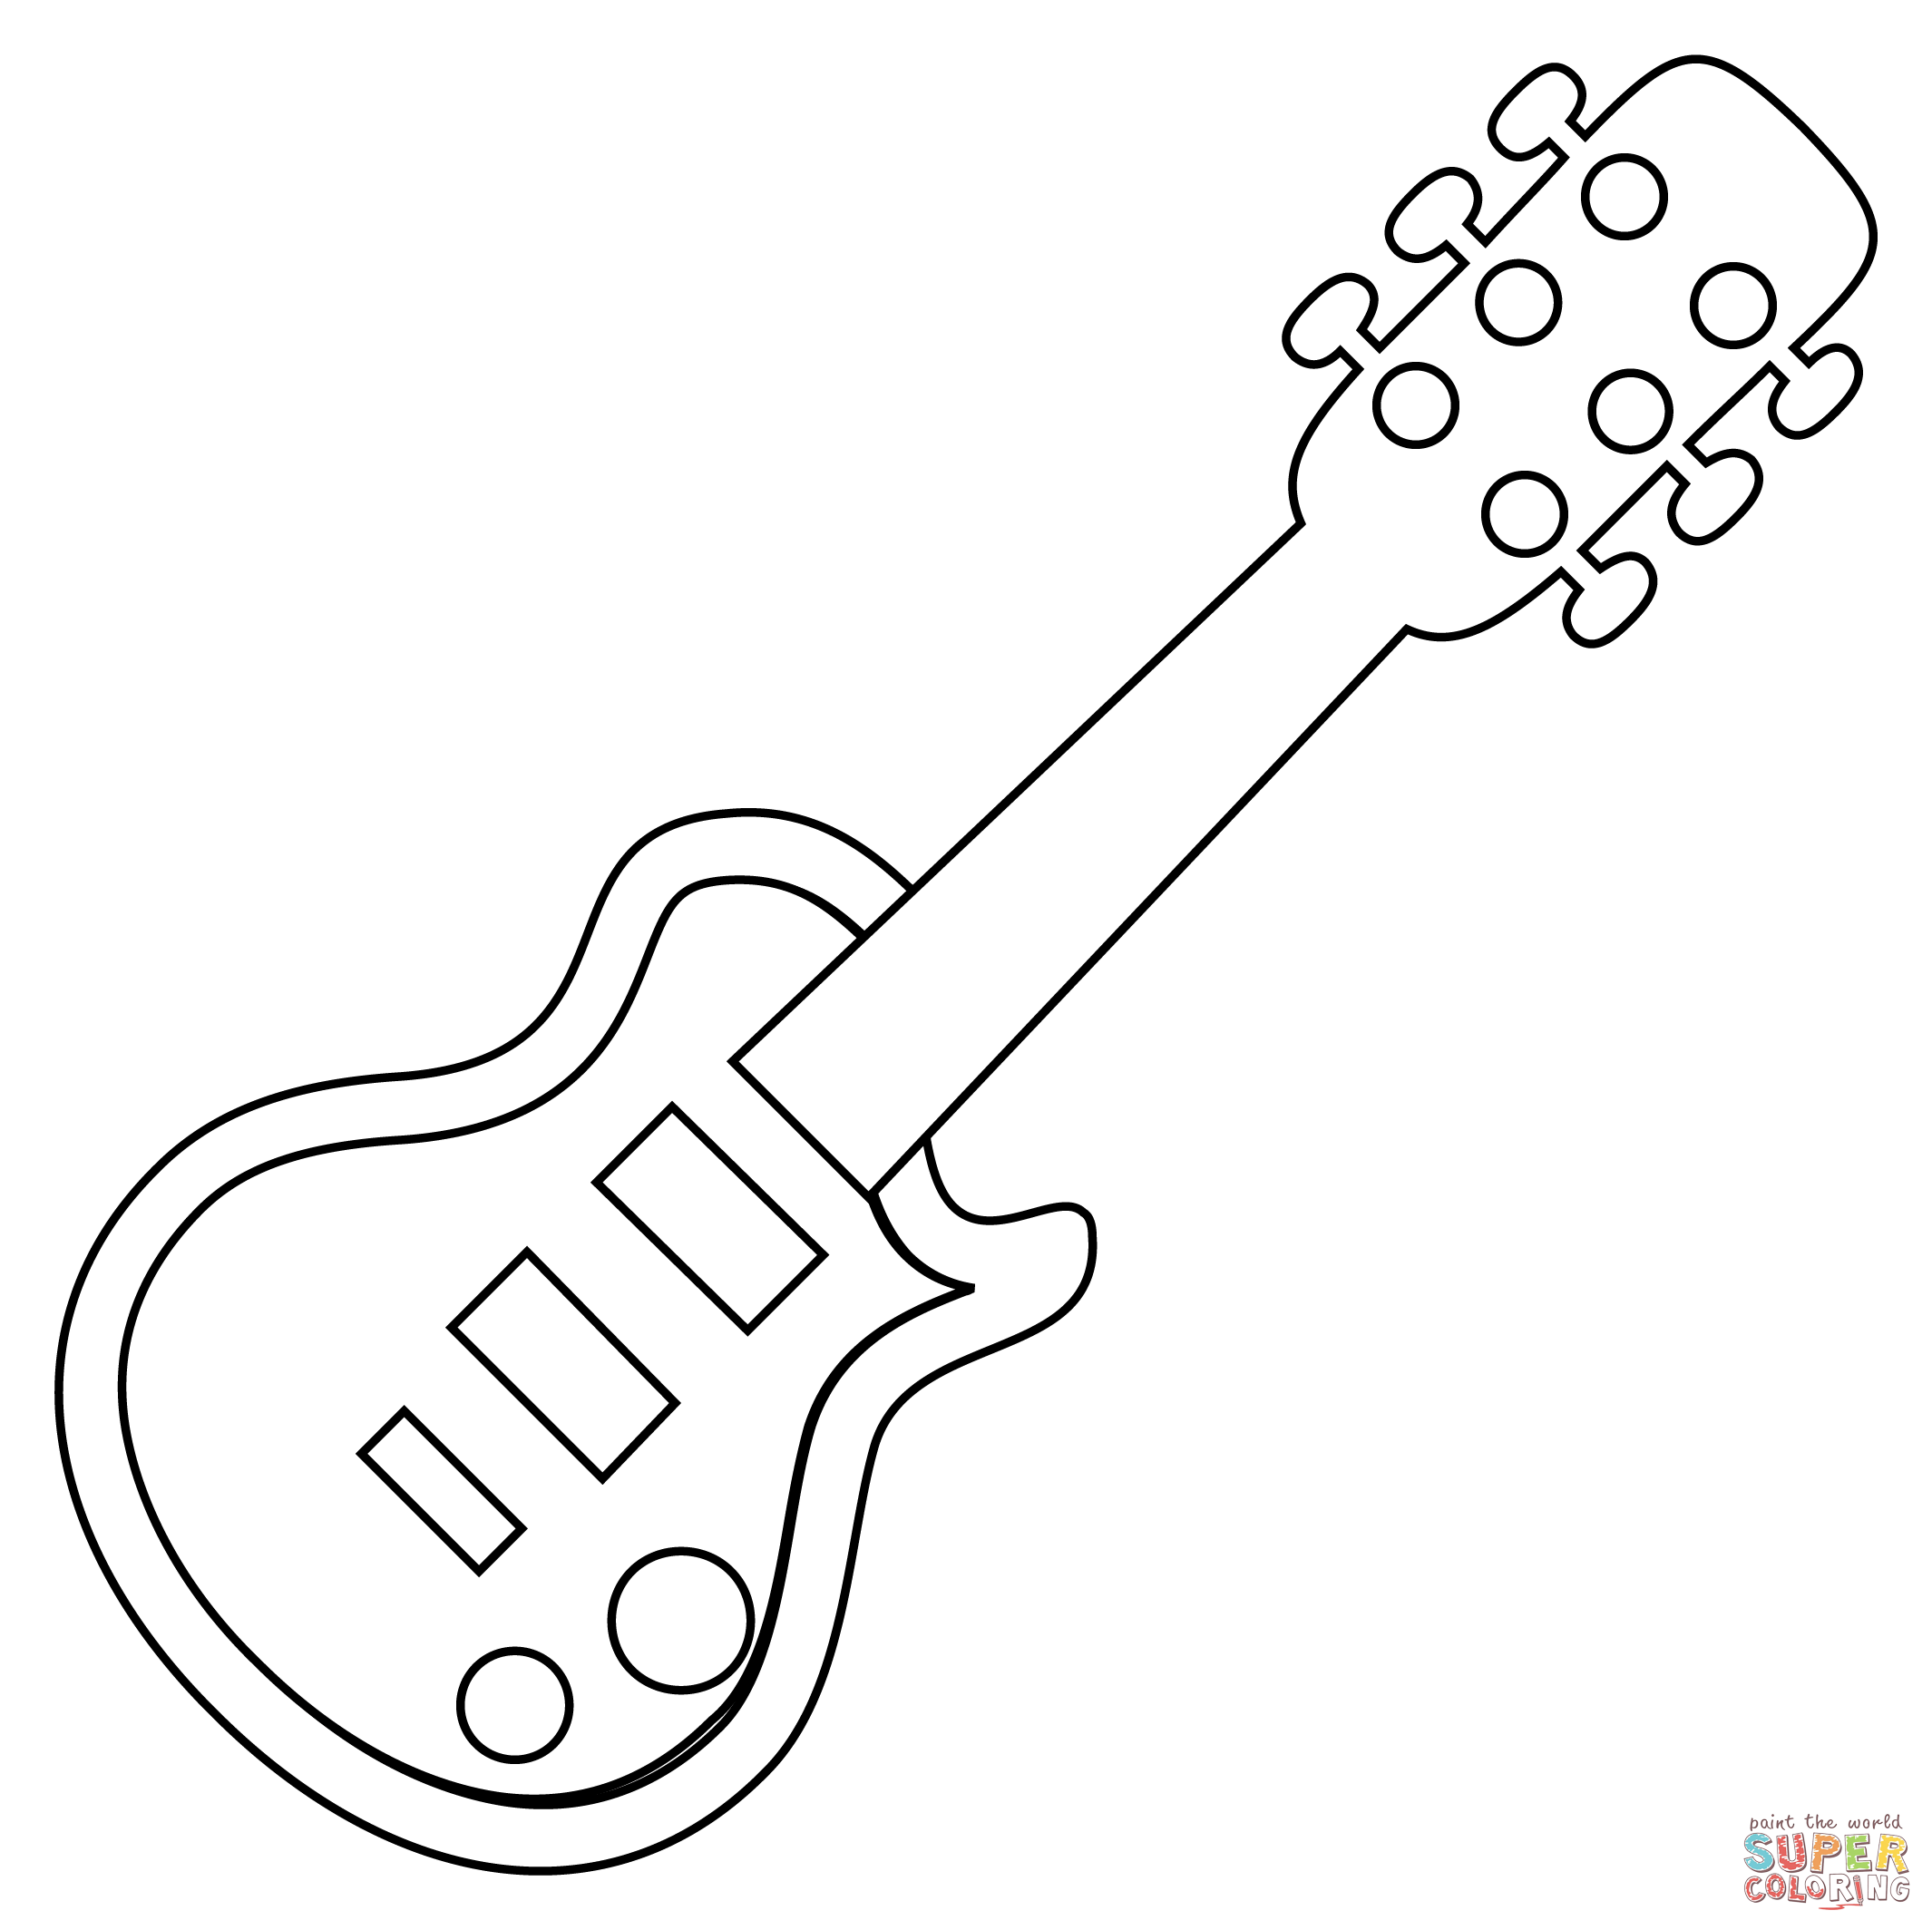 Electric guitar coloring page free printable coloring pages